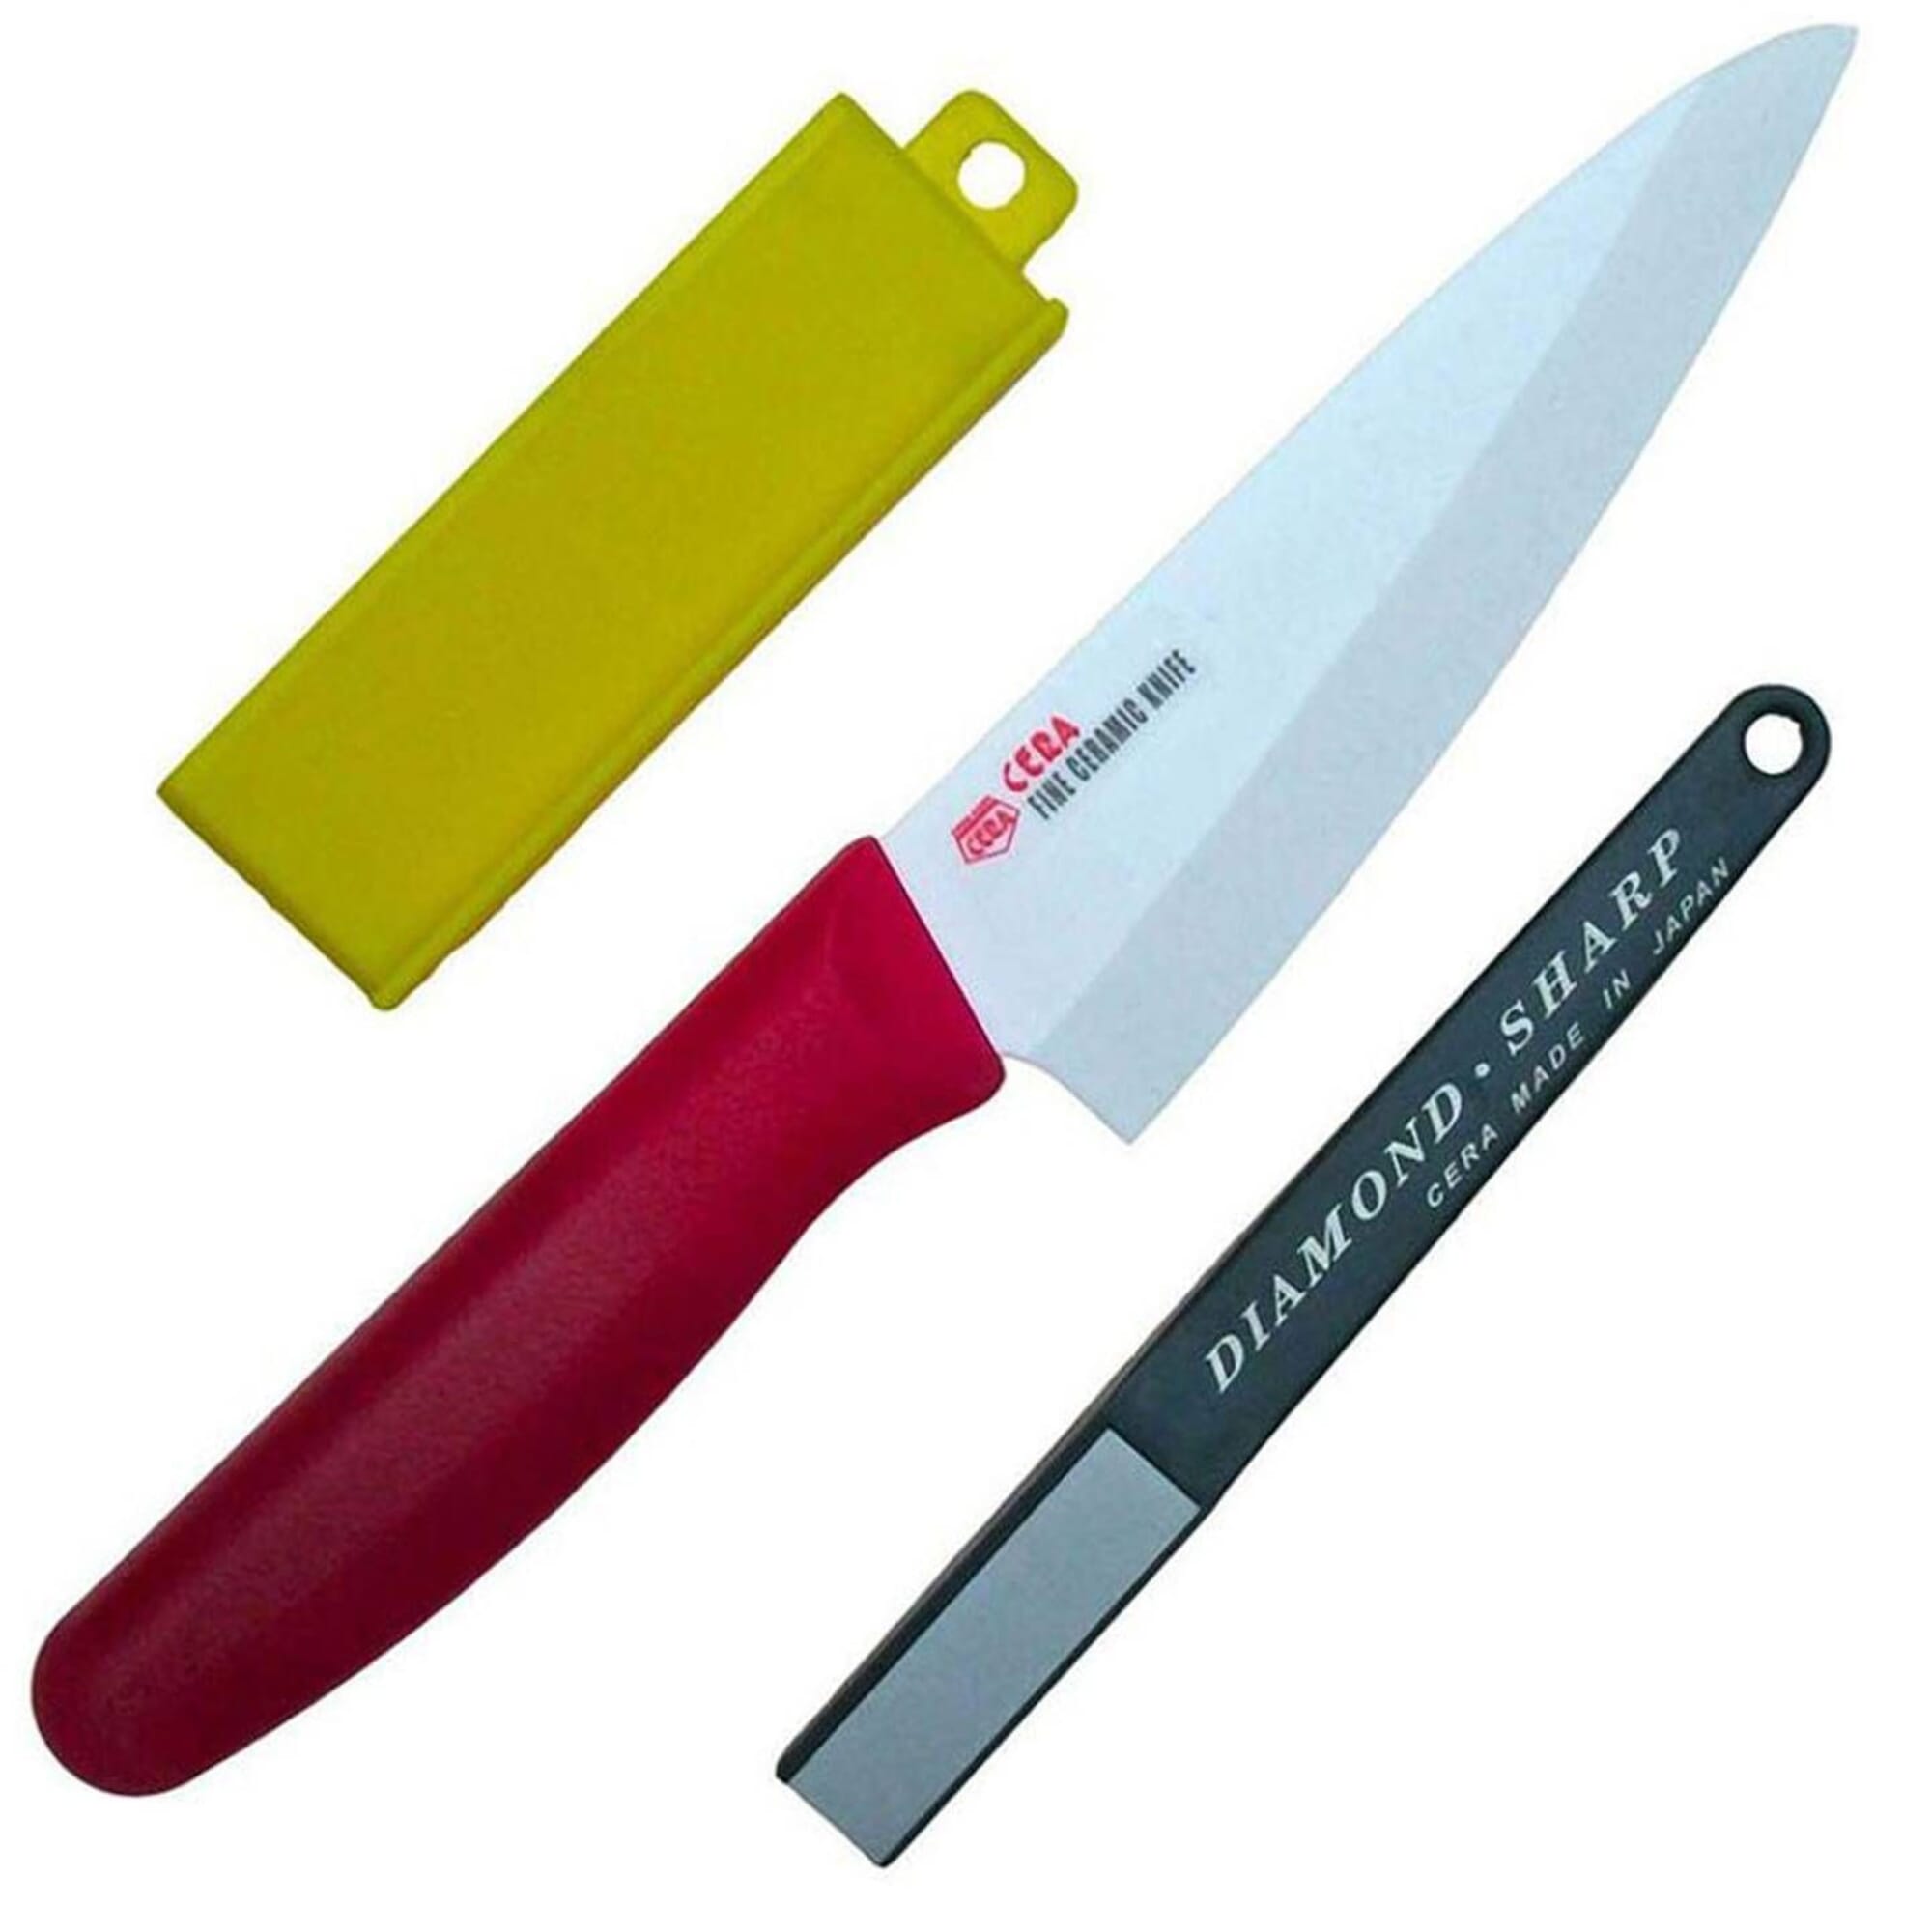 Ceramic Knives: A Complete Guide to Ceramic Blades